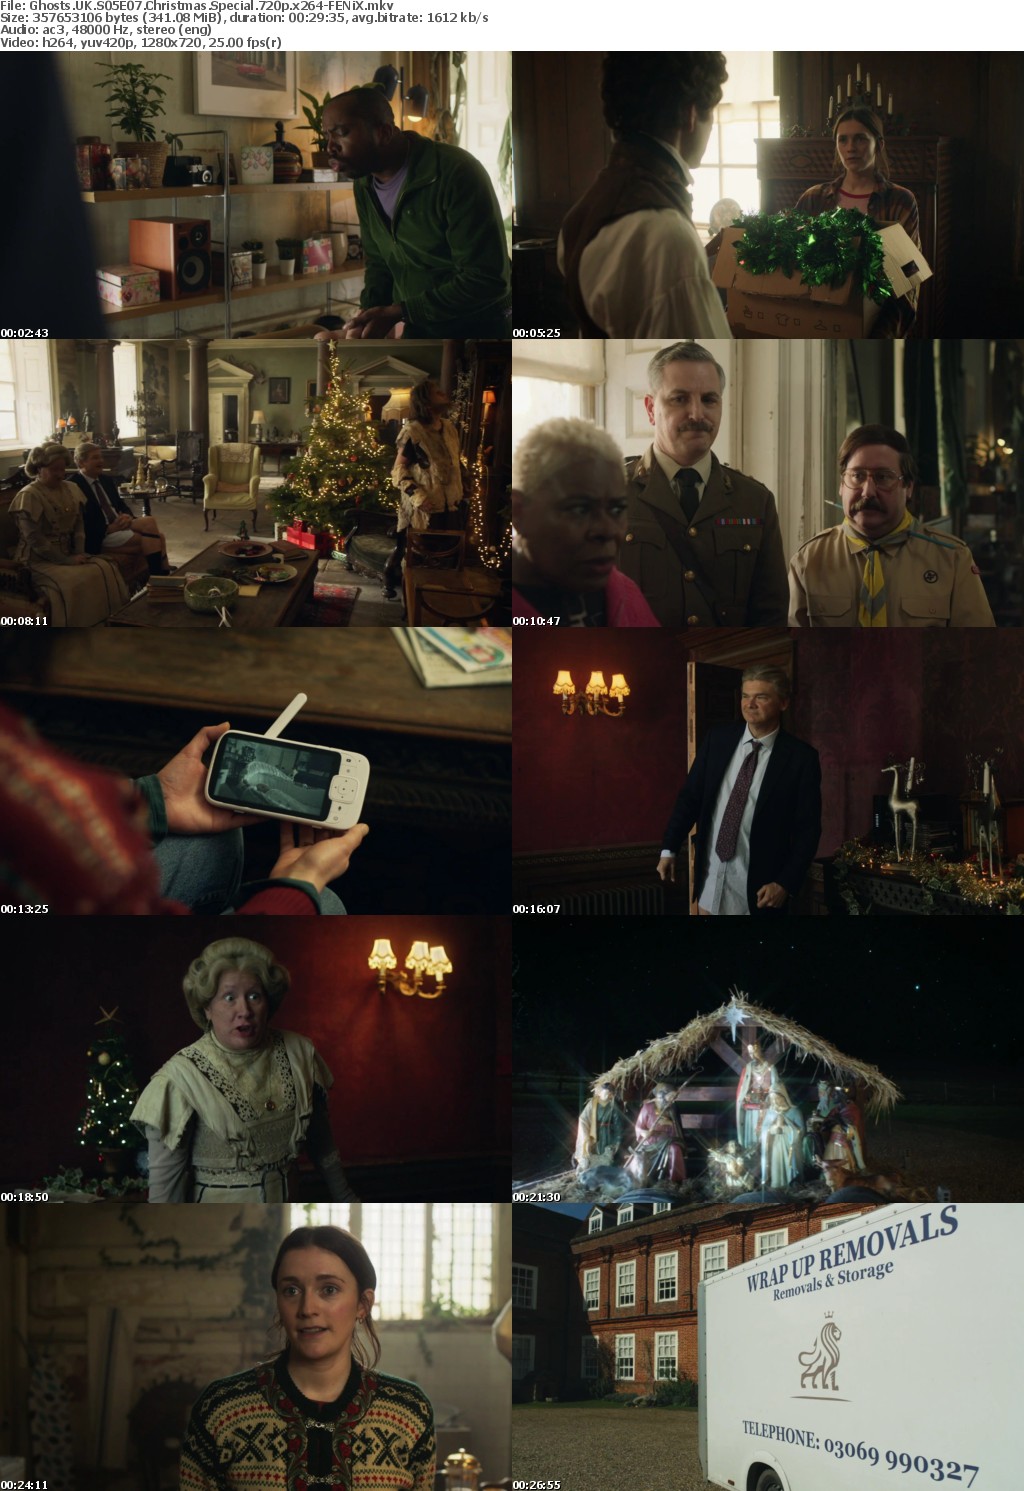 Ghosts UK S05E07 Christmas Special 720p x264-FENiX